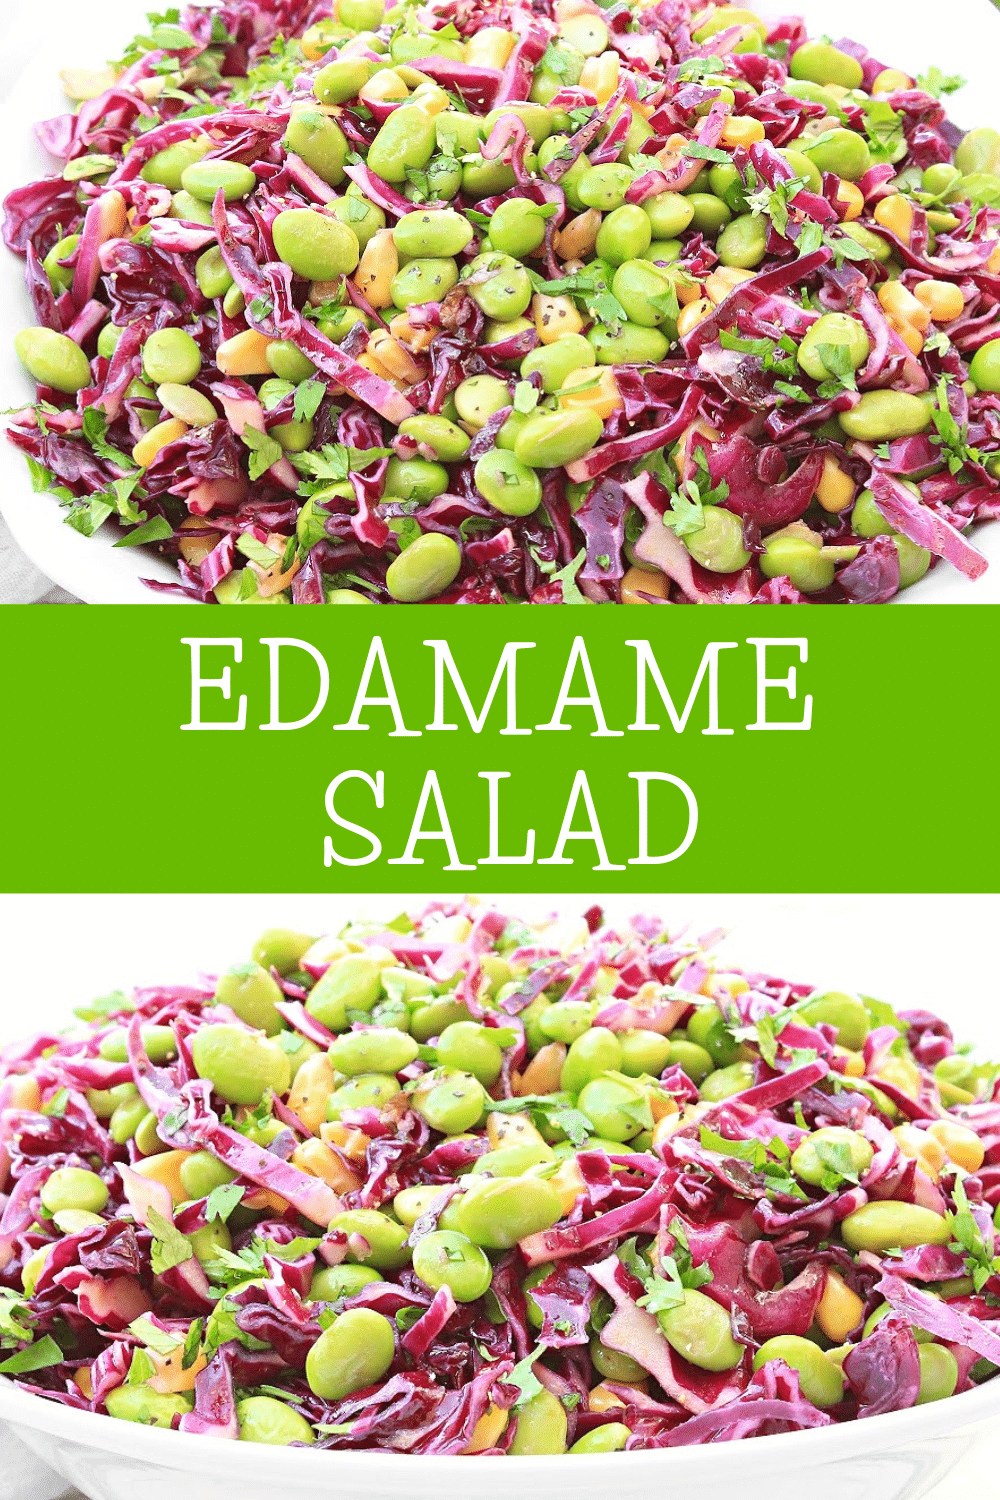 Edamame Salad ~ Light and crisp salad packed with vibrant colors and fresh flavor! Serve as a refreshing side or as a main dish over rice. via @thiswifecooks